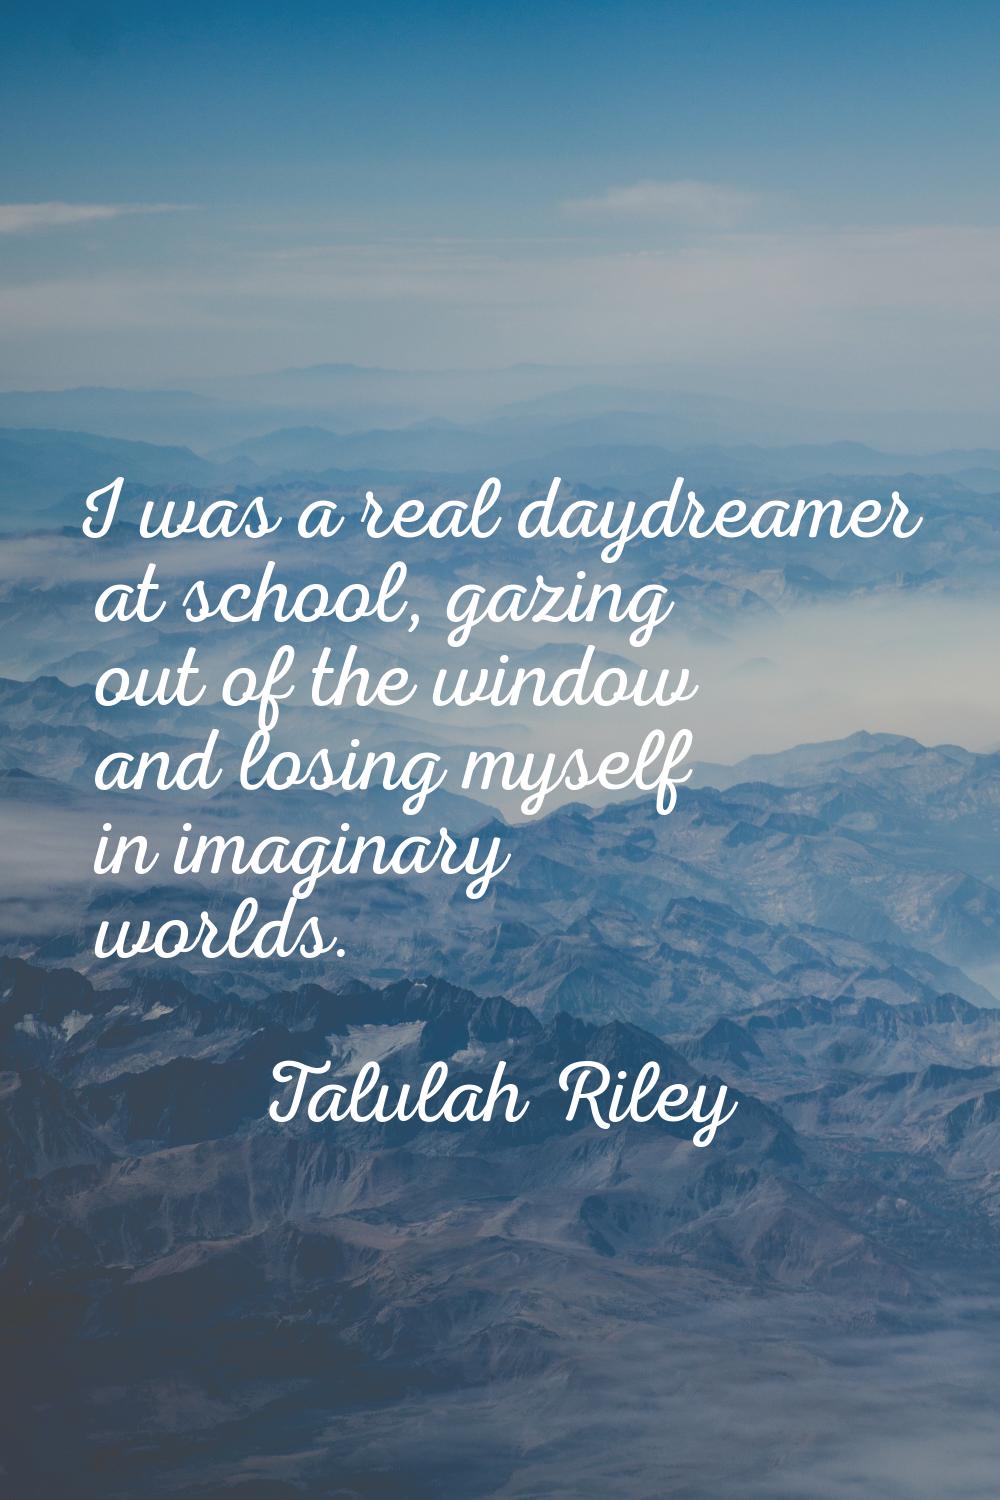 I was a real daydreamer at school, gazing out of the window and losing myself in imaginary worlds.